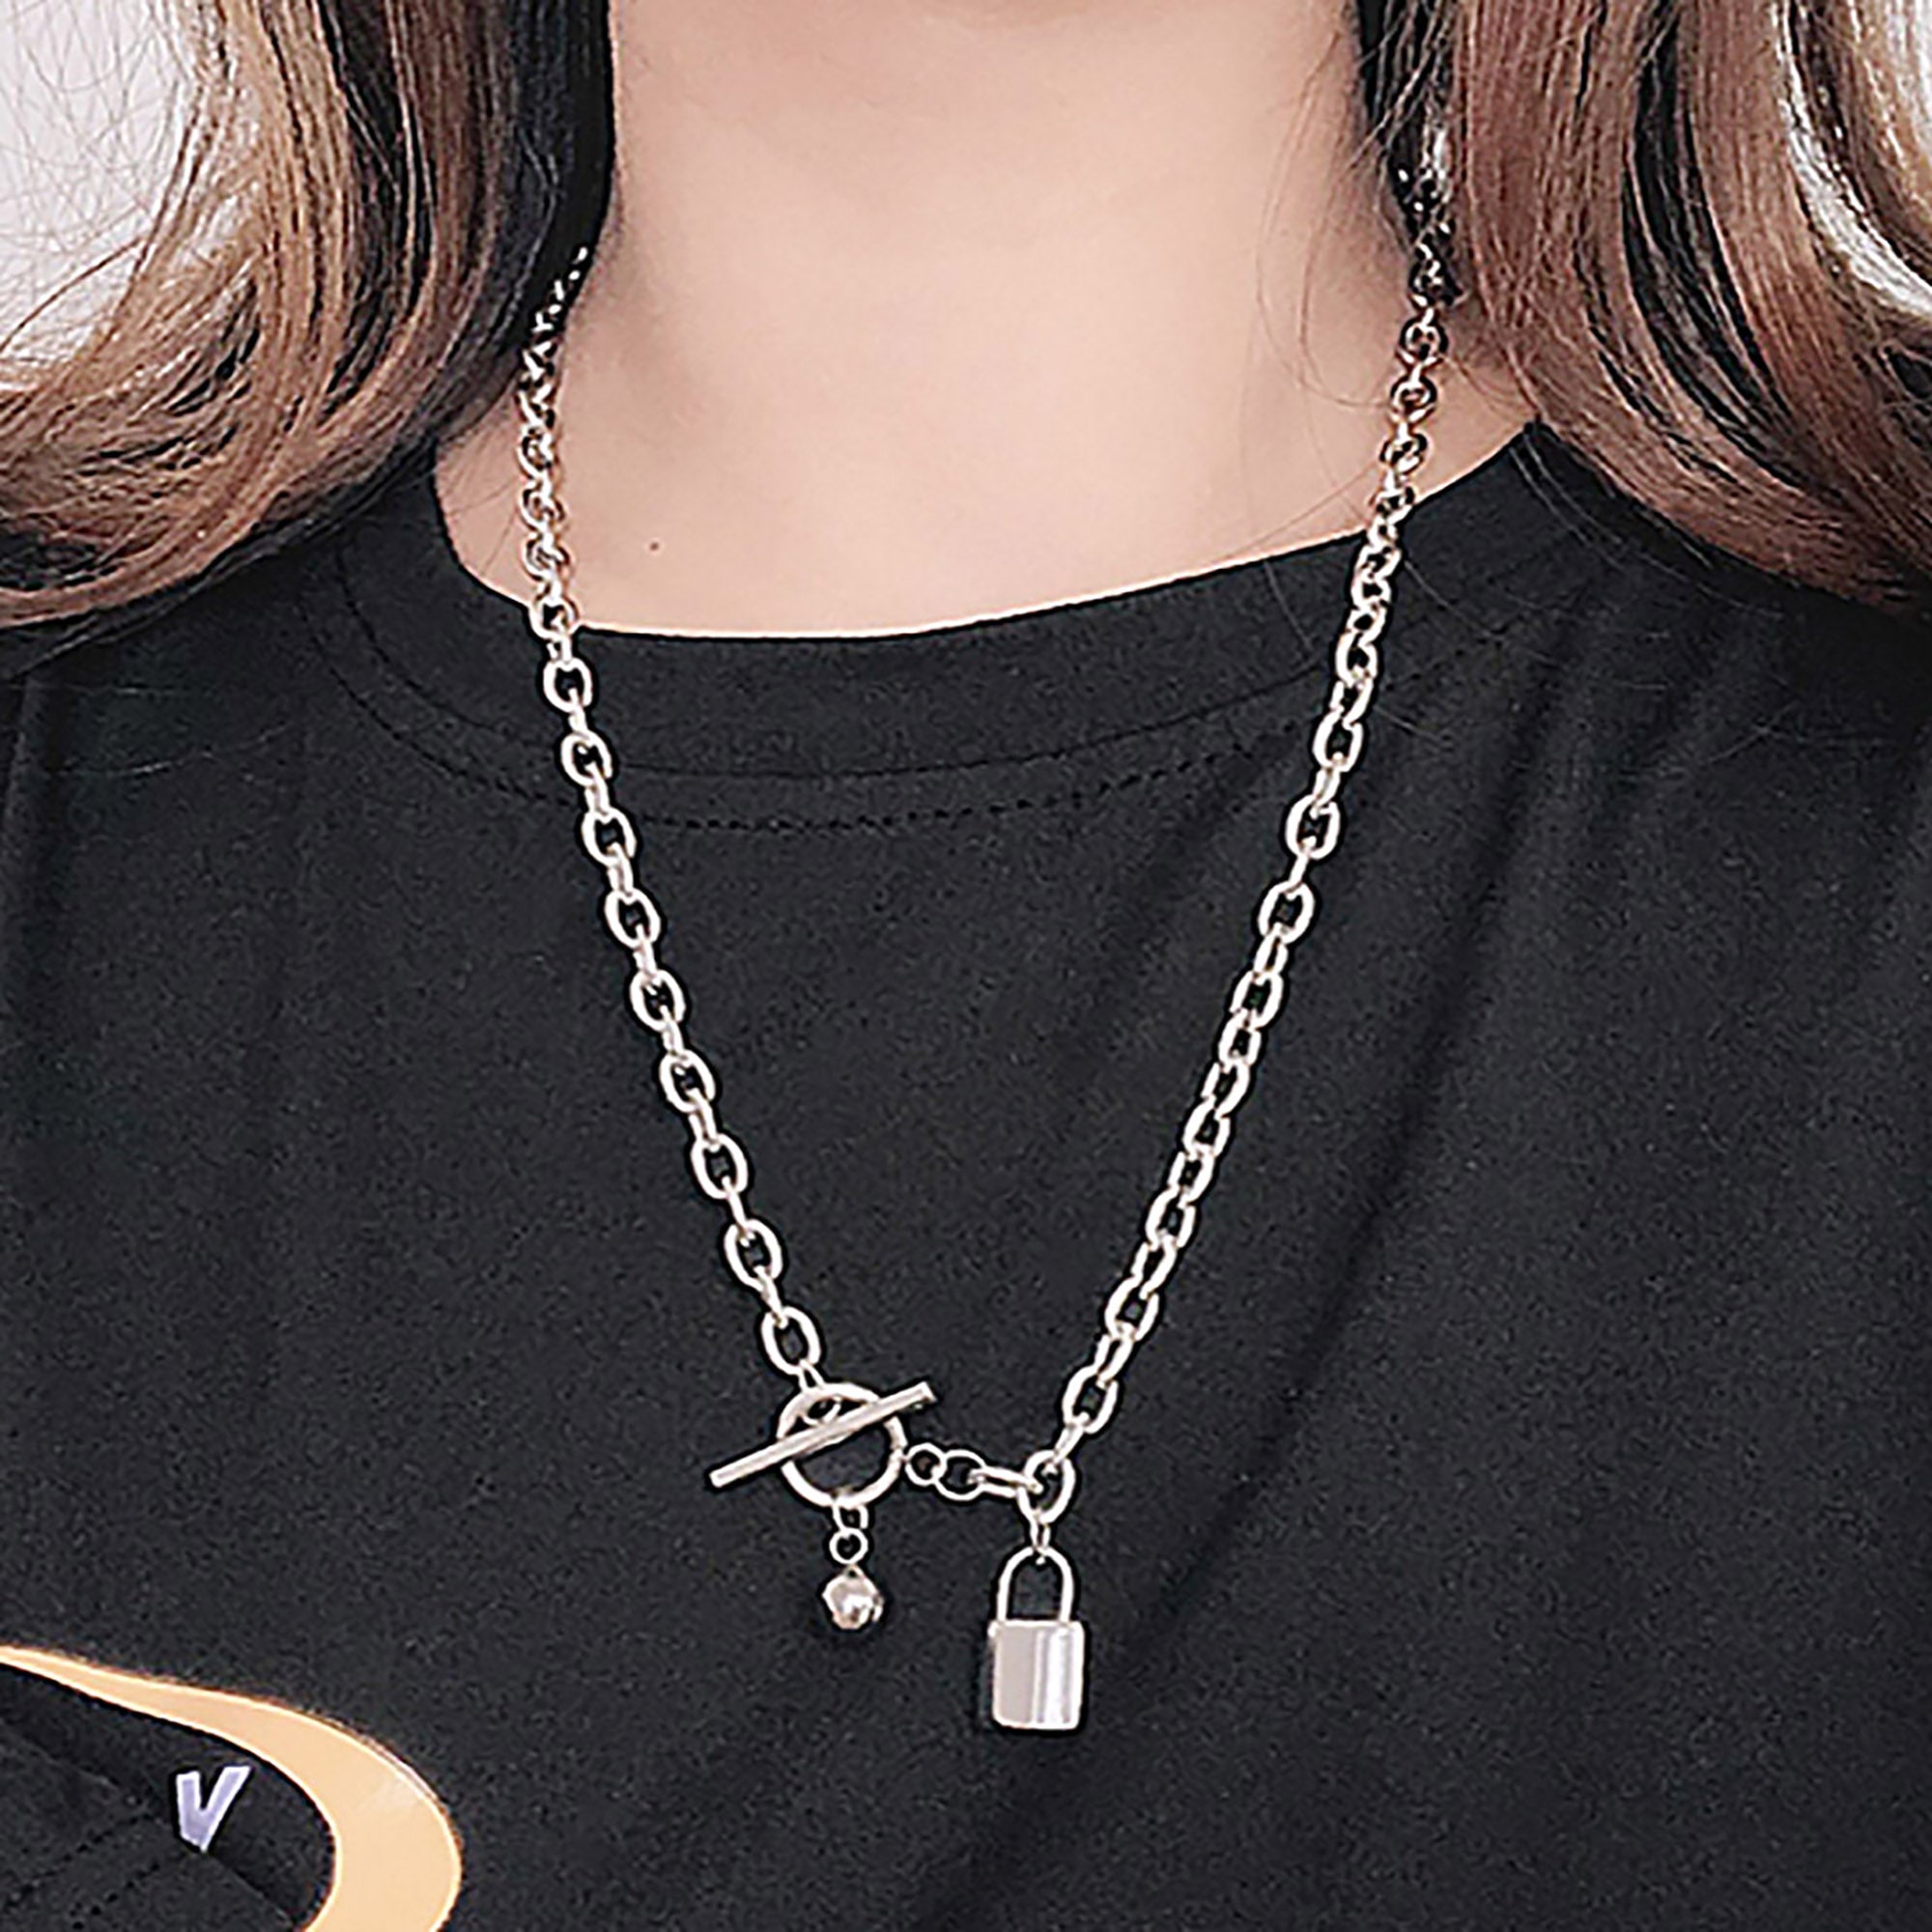 Stainless Steel 51cm Lock w/ Buckle Layered Necklace Valentine Day Gift KOL / Youtuber / Celebrity / Fashion Icon styling